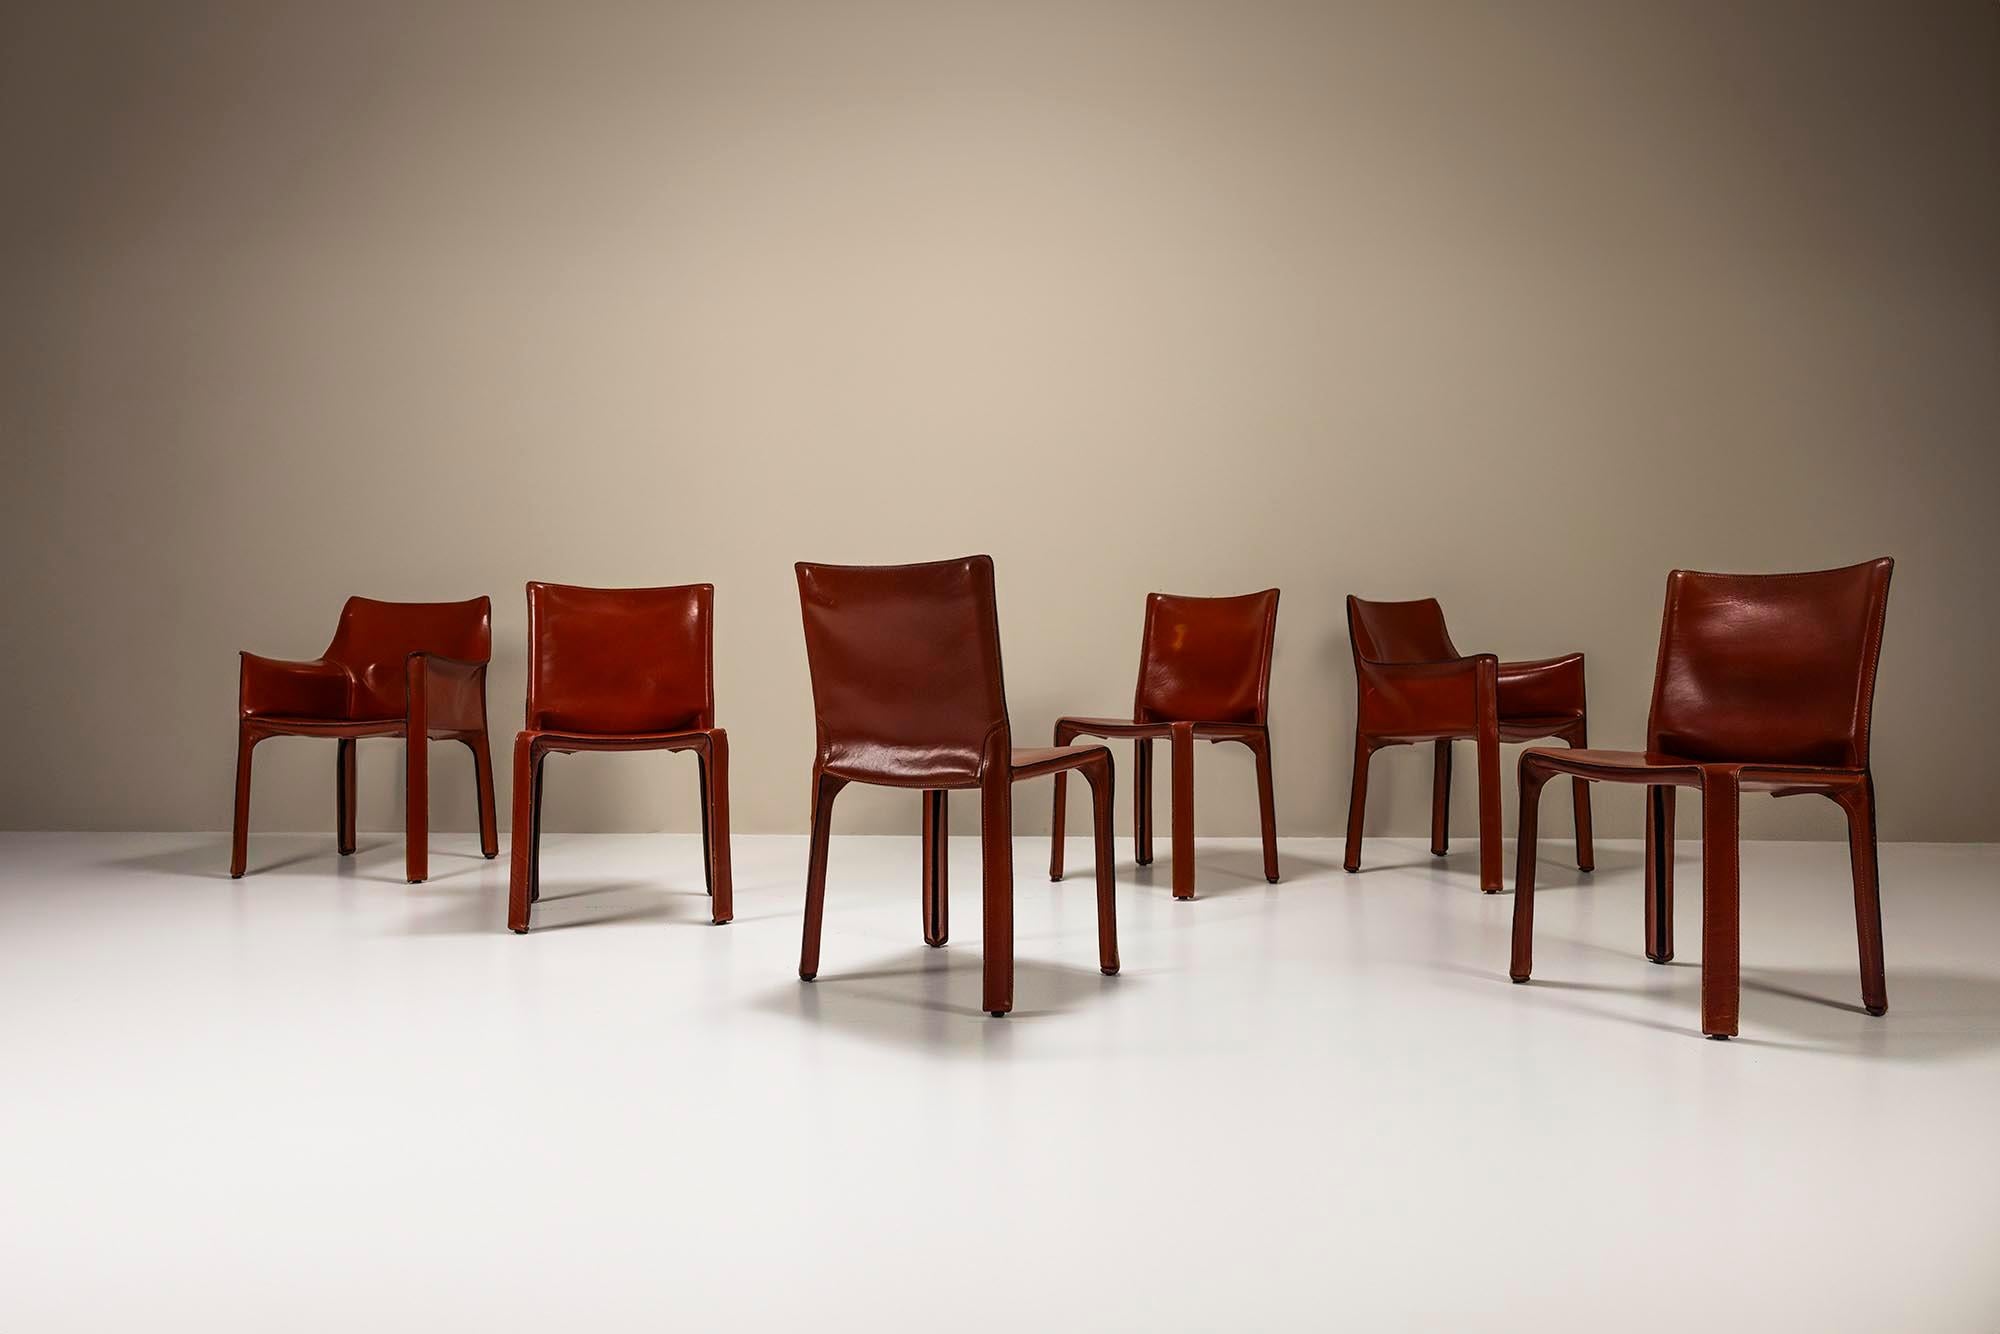 Of course, known for their presence in the MoMa in New York are these CAB chairs by the Italian architect and designer Mario Bellini. Its design communicates an exercise in simplicity, craftsmanship, and beauty. This set consists of four dining